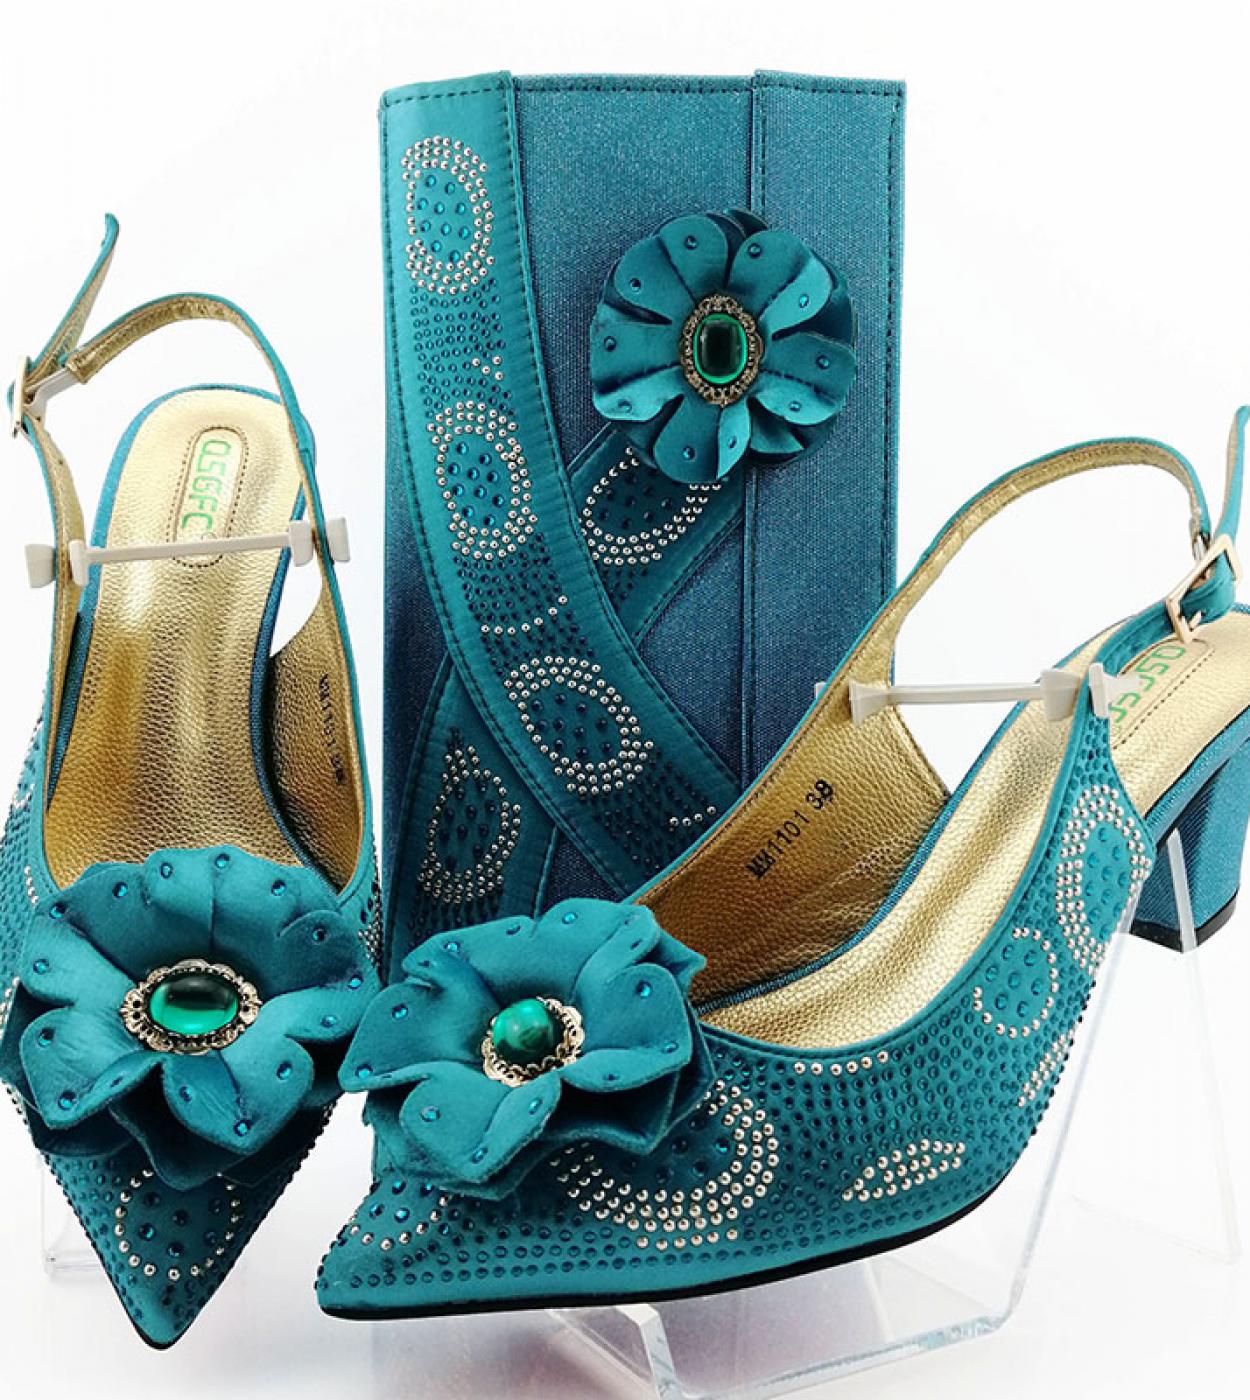 Hot Selling Sky Blue Color Italian Design Shoes With Matching Bag High Quality African Nigeria Bag And Shoe Set For Part